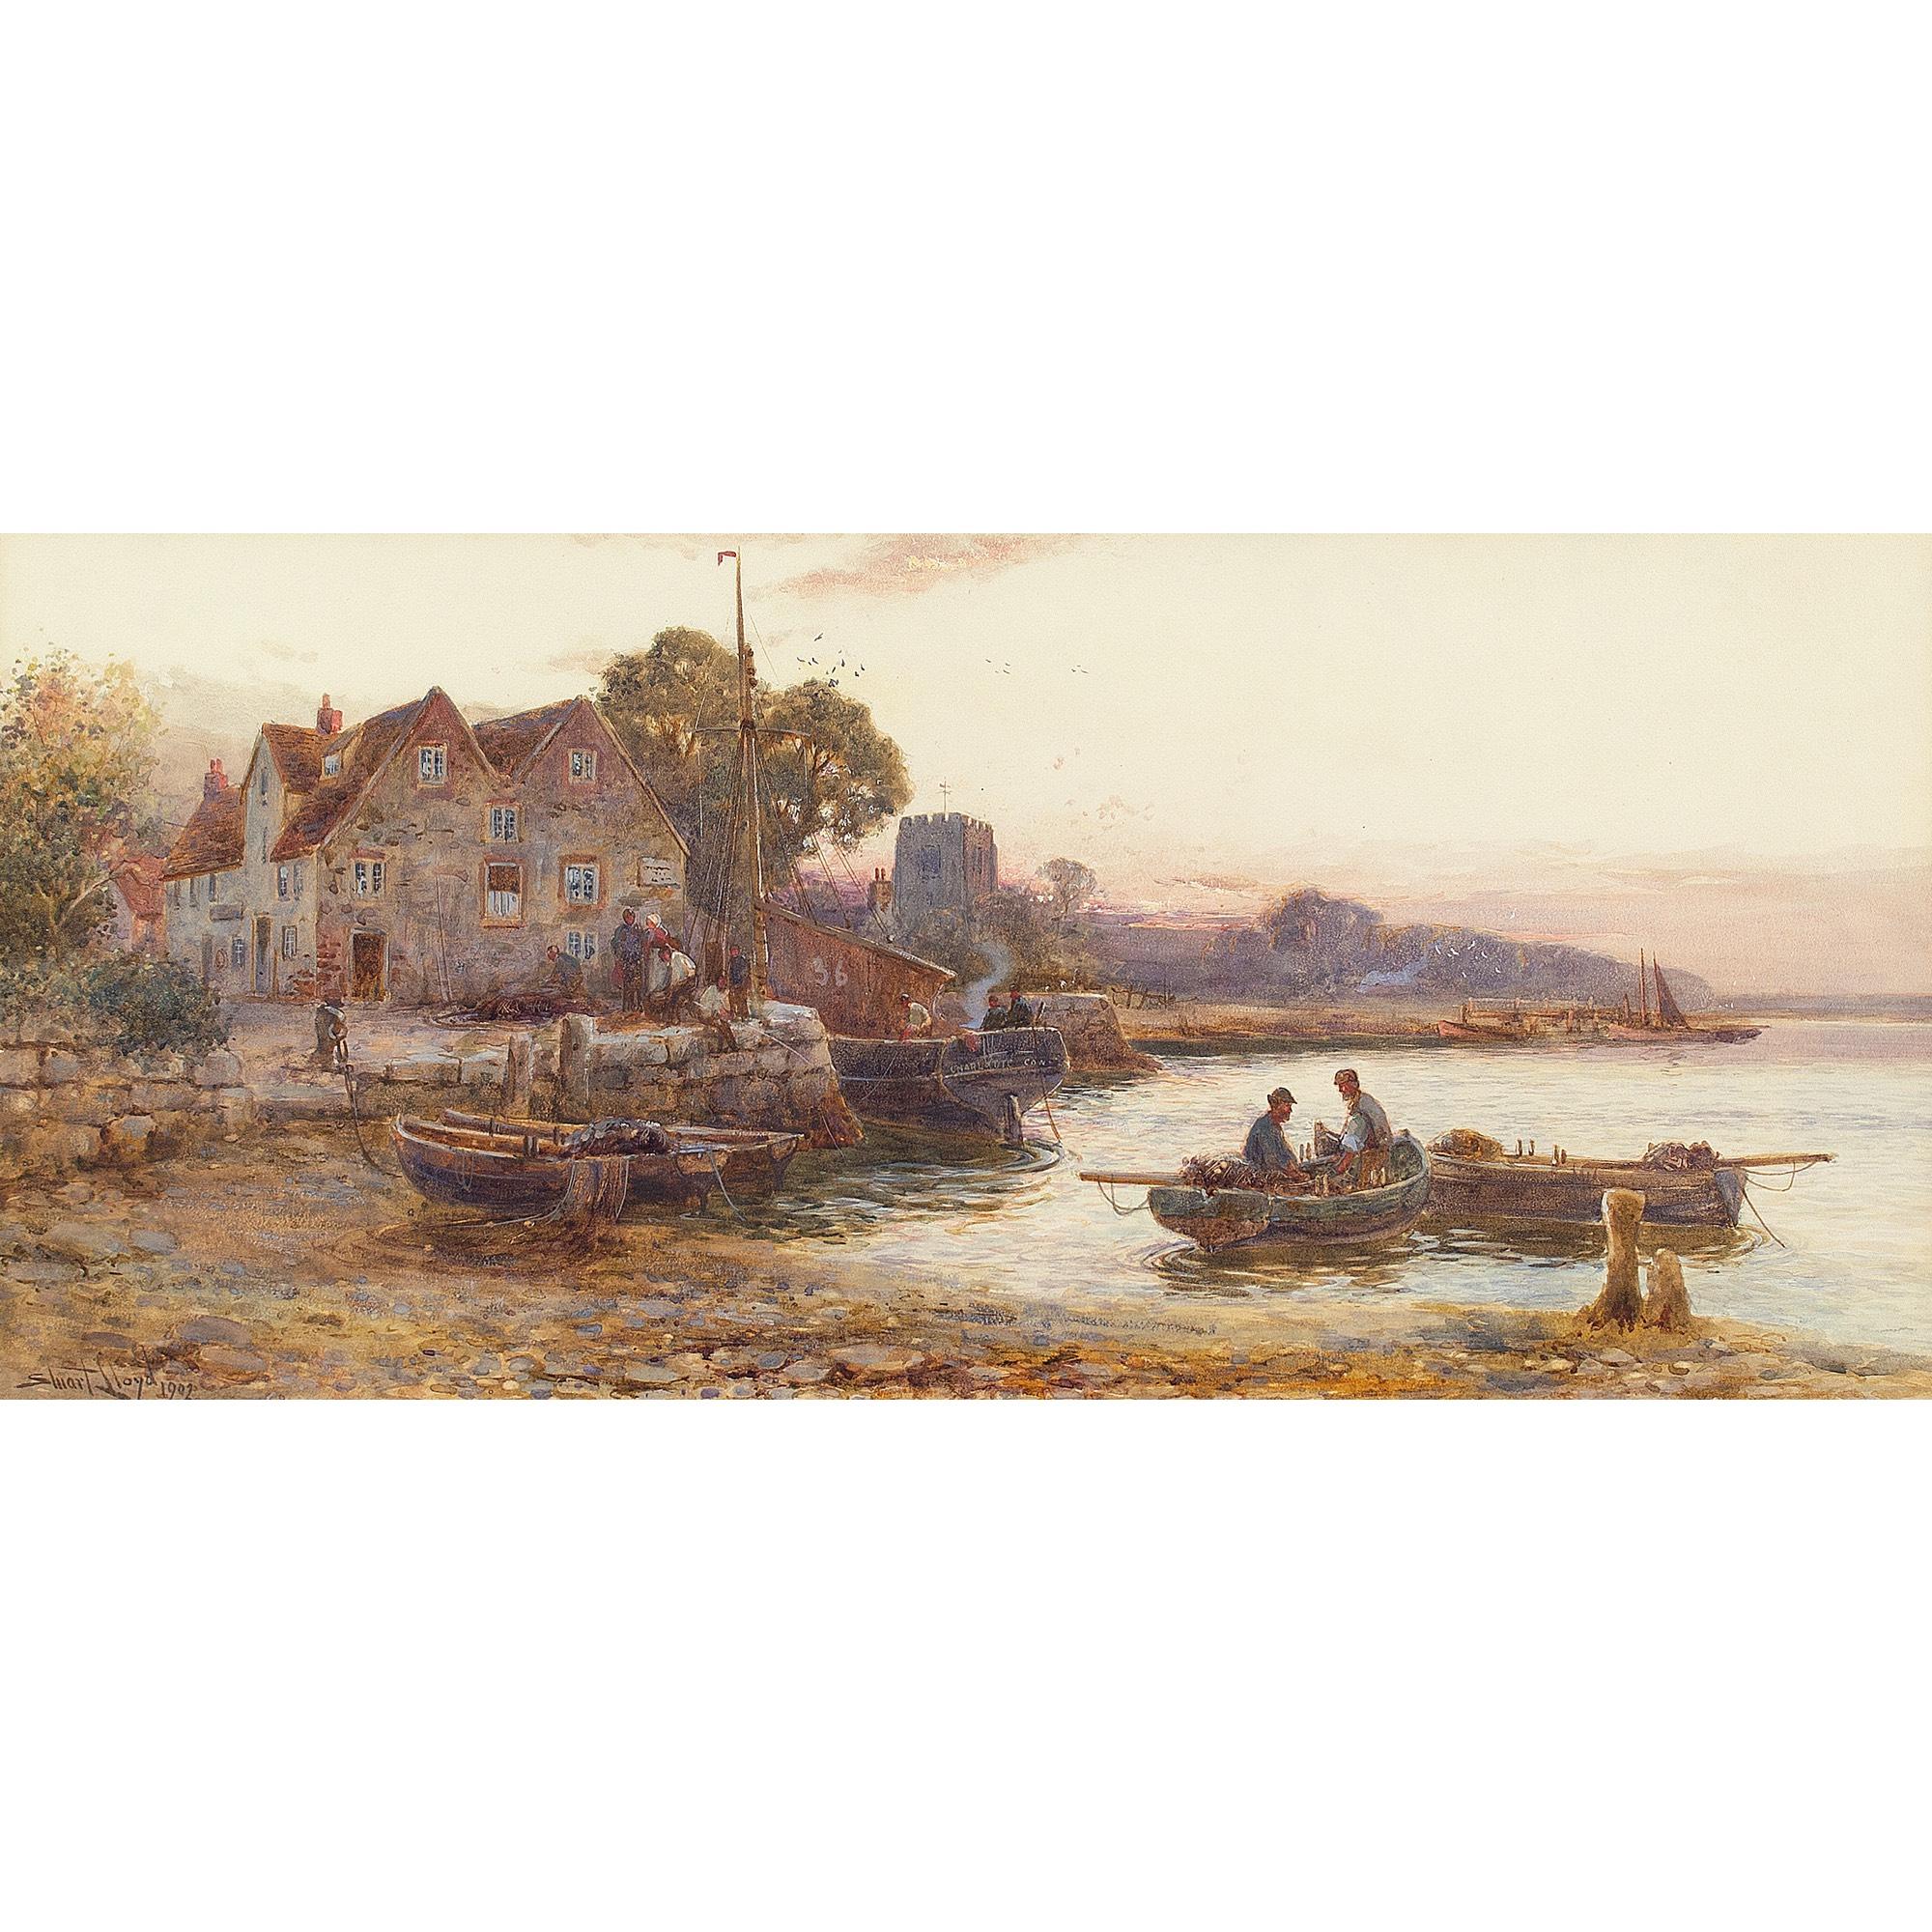 This beautiful early 20th-century watercolour by British artist Walter Stuart Lloyd (1845-1929) depicts a picturesque view of Wooten Creek on the Isle of Wight.

Lloyd’s masterly handling captures the light sublimely as it shimmers atop the gentle